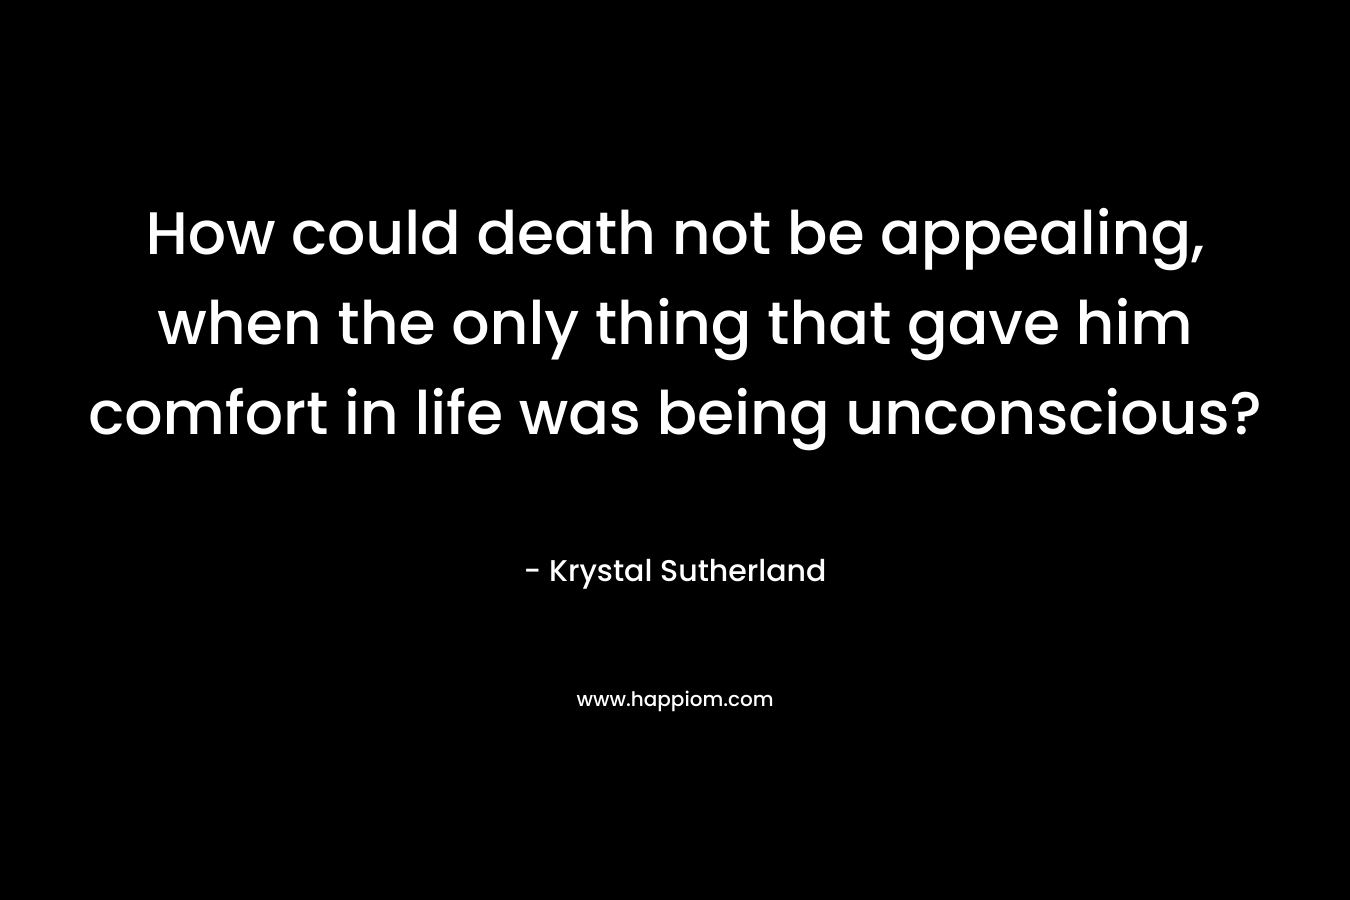 How could death not be appealing, when the only thing that gave him comfort in life was being unconscious?